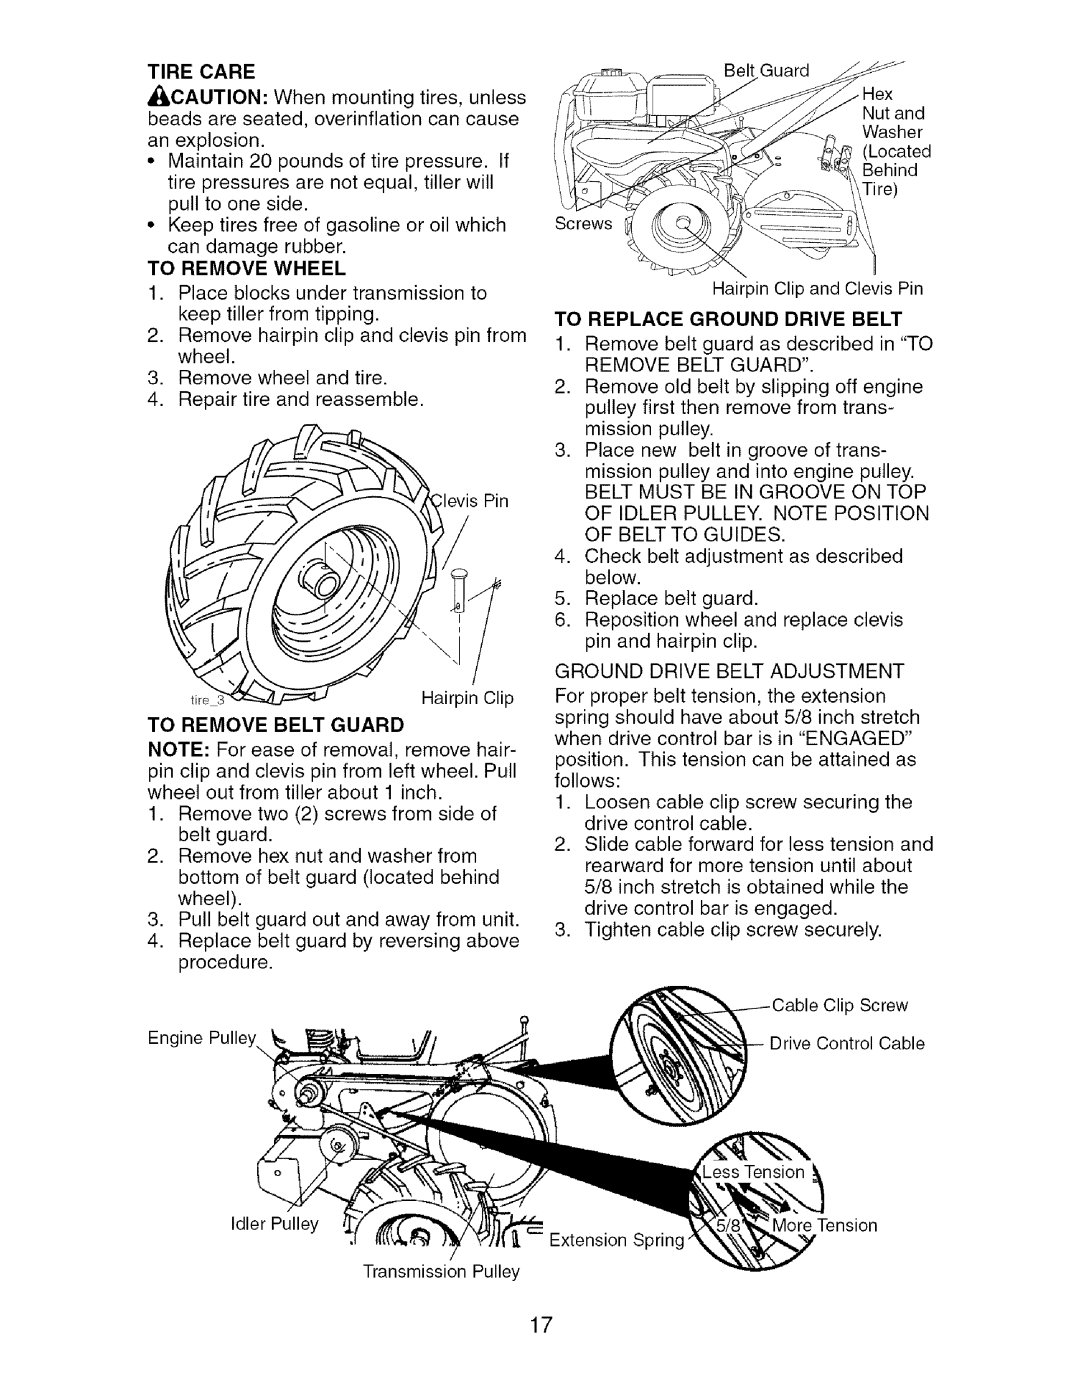 Craftsman 917.29604 owner manual Tire Care, To Remove Belt Guard, To Replace Ground Drive Belt 